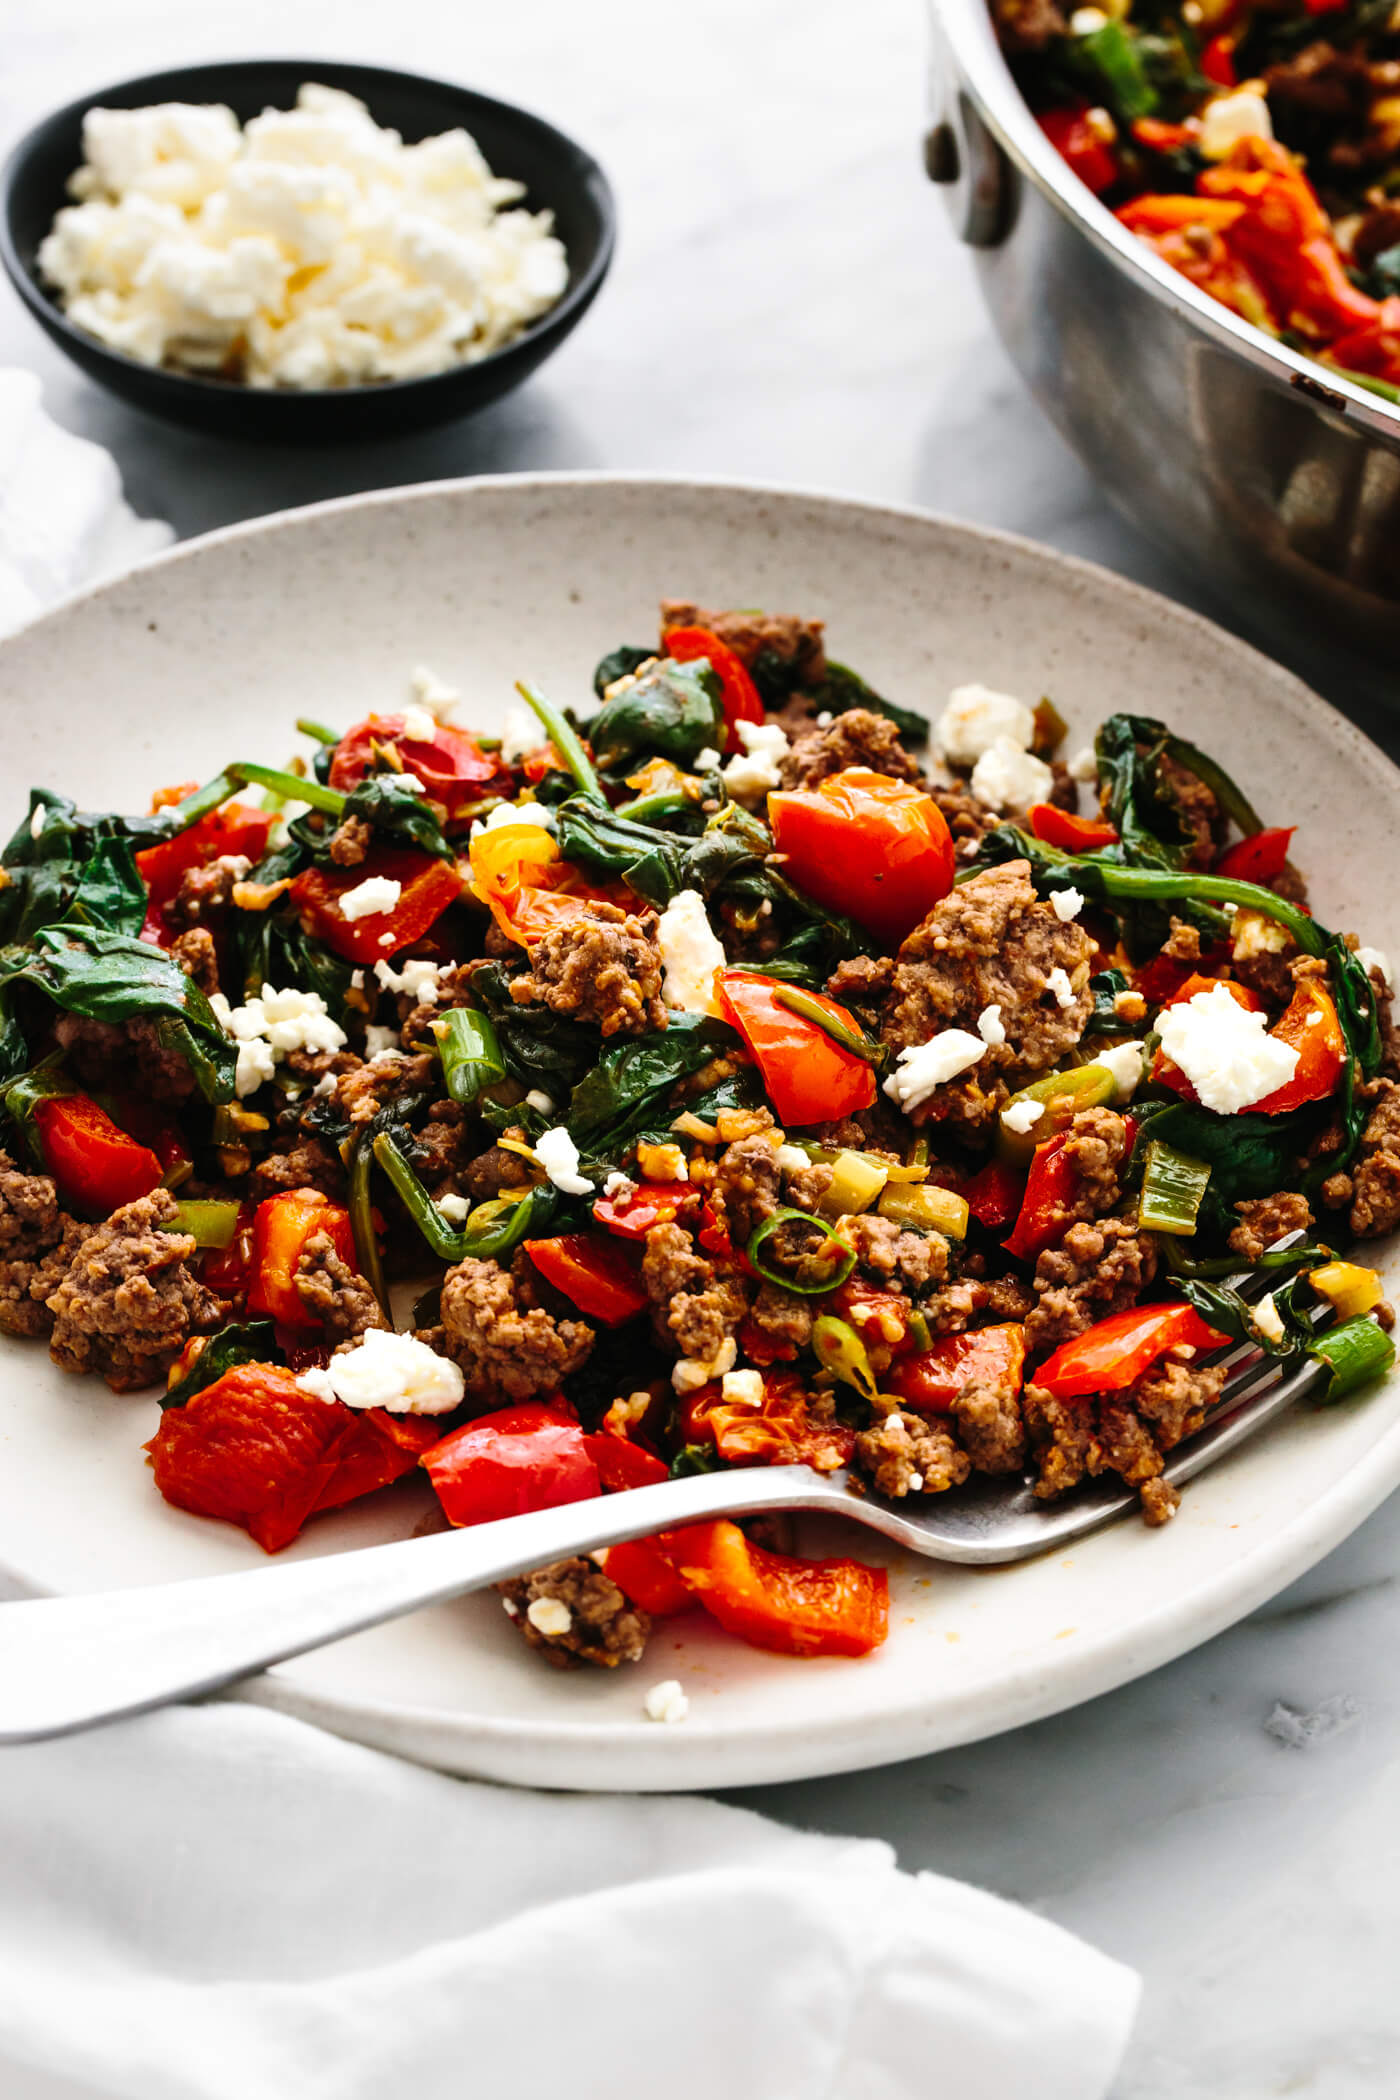 A plate of Mediterranean ground beef stir fry next to a bowl of feta.